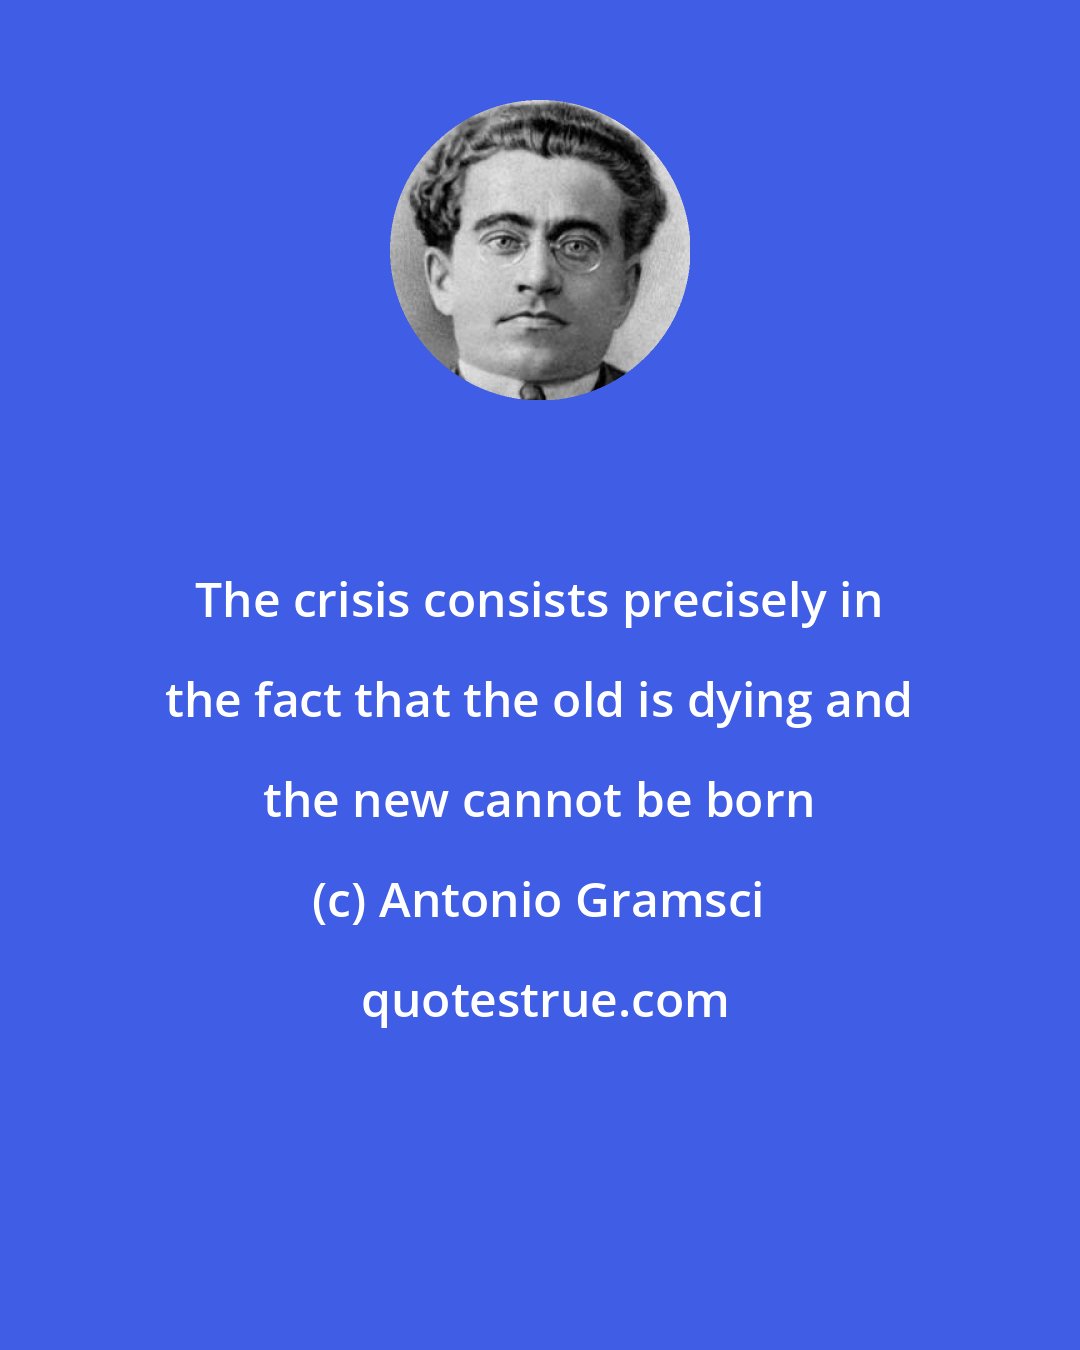 Antonio Gramsci: The crisis consists precisely in the fact that the old is dying and the new cannot be born